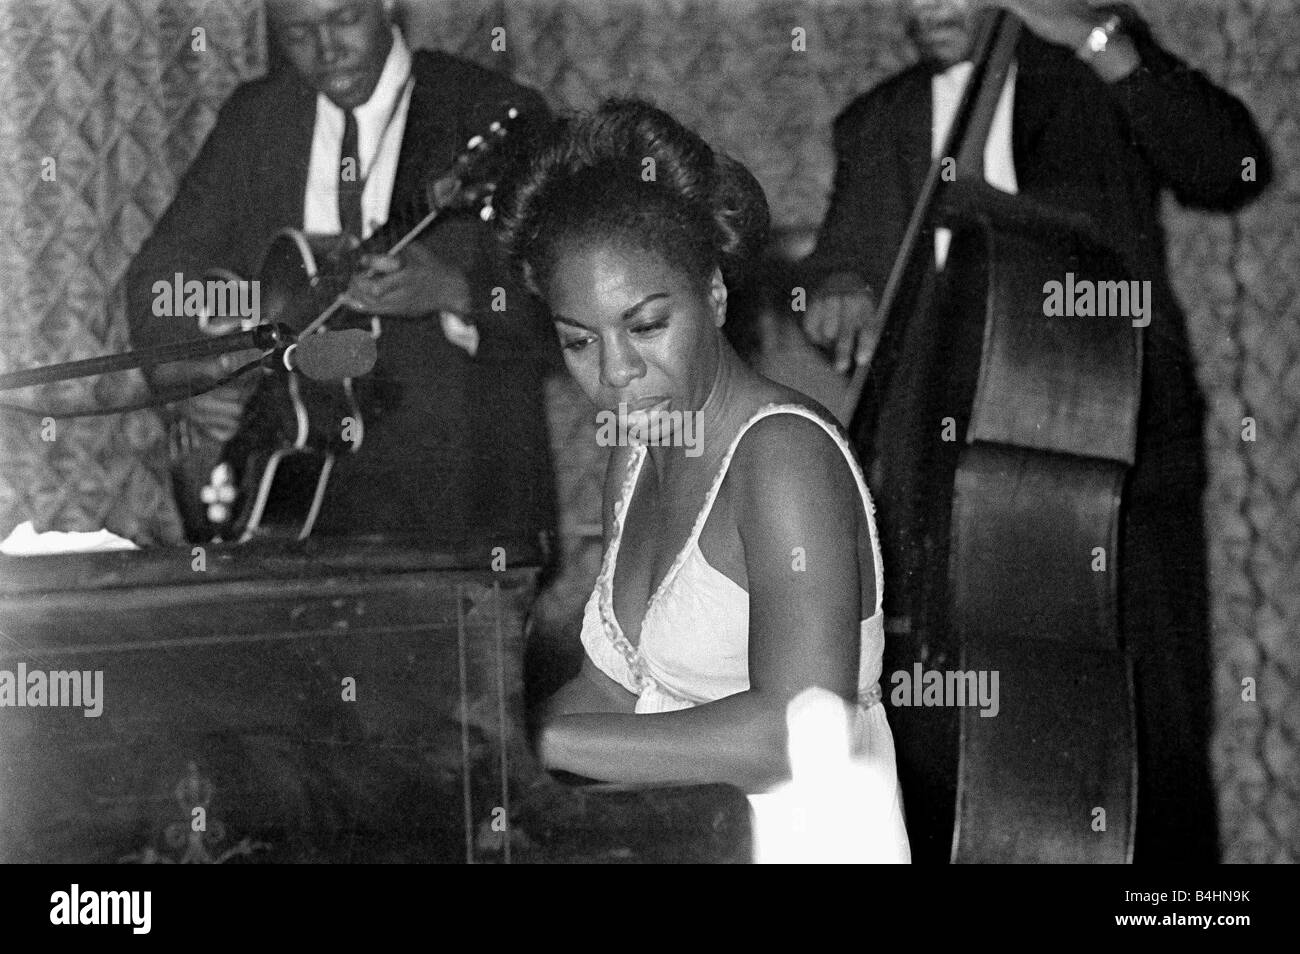 Nina Simone June 1965 Jazz singer Pictured preforming at Annies Club on stage playing piano Eunice Kathleen Waymon Nina Simone singer and songwriter born Tryon North Carolina 21 February 1933 married 1958 Don Ross marriage dissolved 1961 Andrew Stroud one daughter marriage dissolved 1971 died Carry le Rouet France 21 April 2003 She adopted the name Nina Simone Nina meaning little one came from a Hispanic boyfriend and Simone was from the French actress Simone Signoret Jazz Singers 1960s Mirrorpix Stock Photo